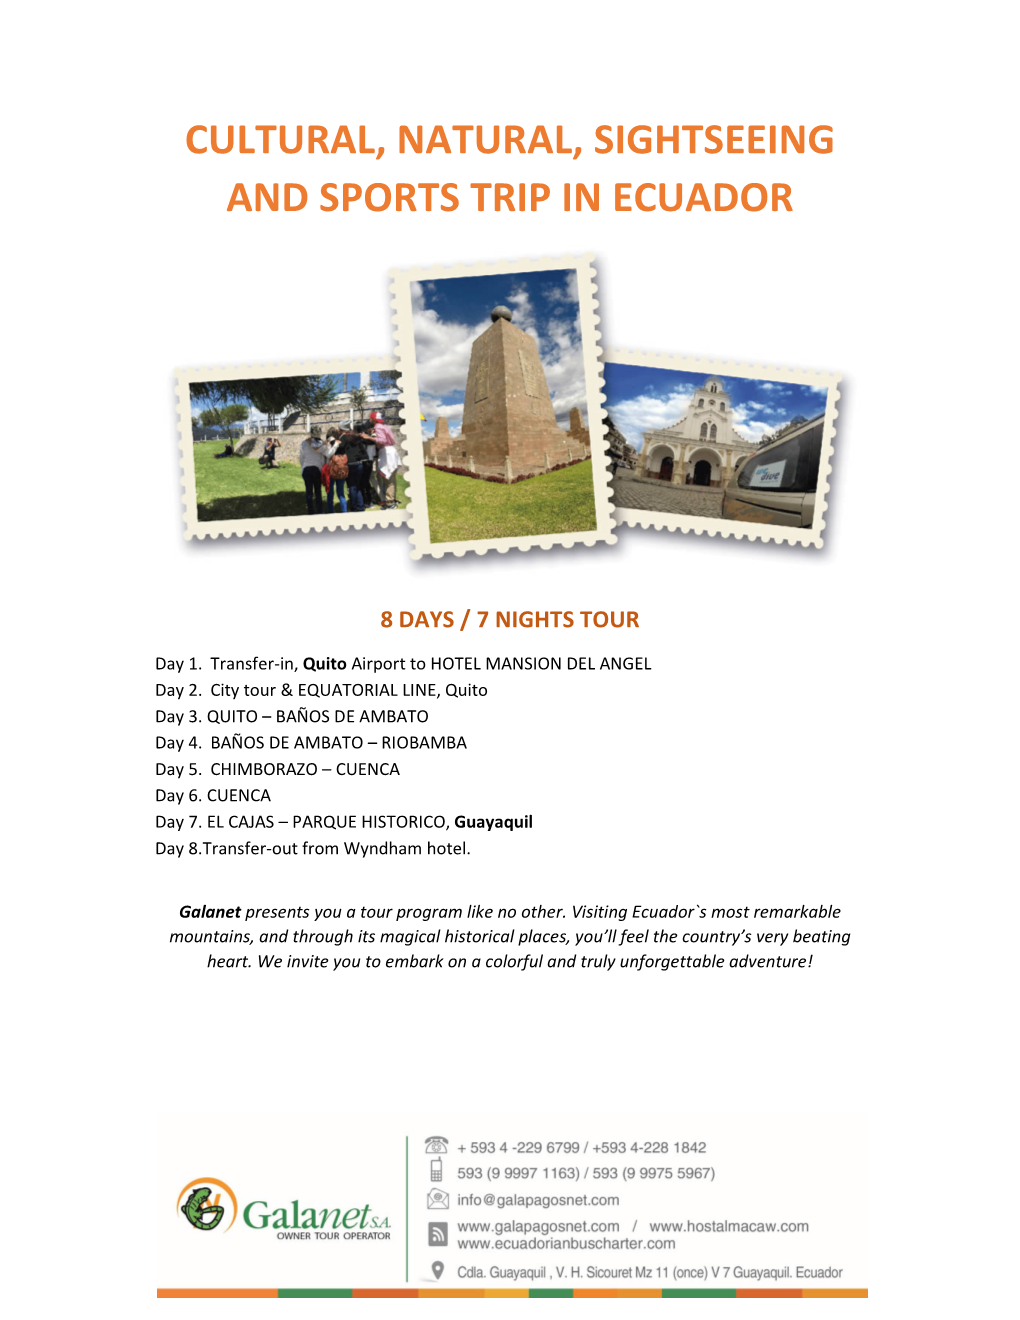 Cultural, Natural, Sightseeing and Sports Trip in Ecuador